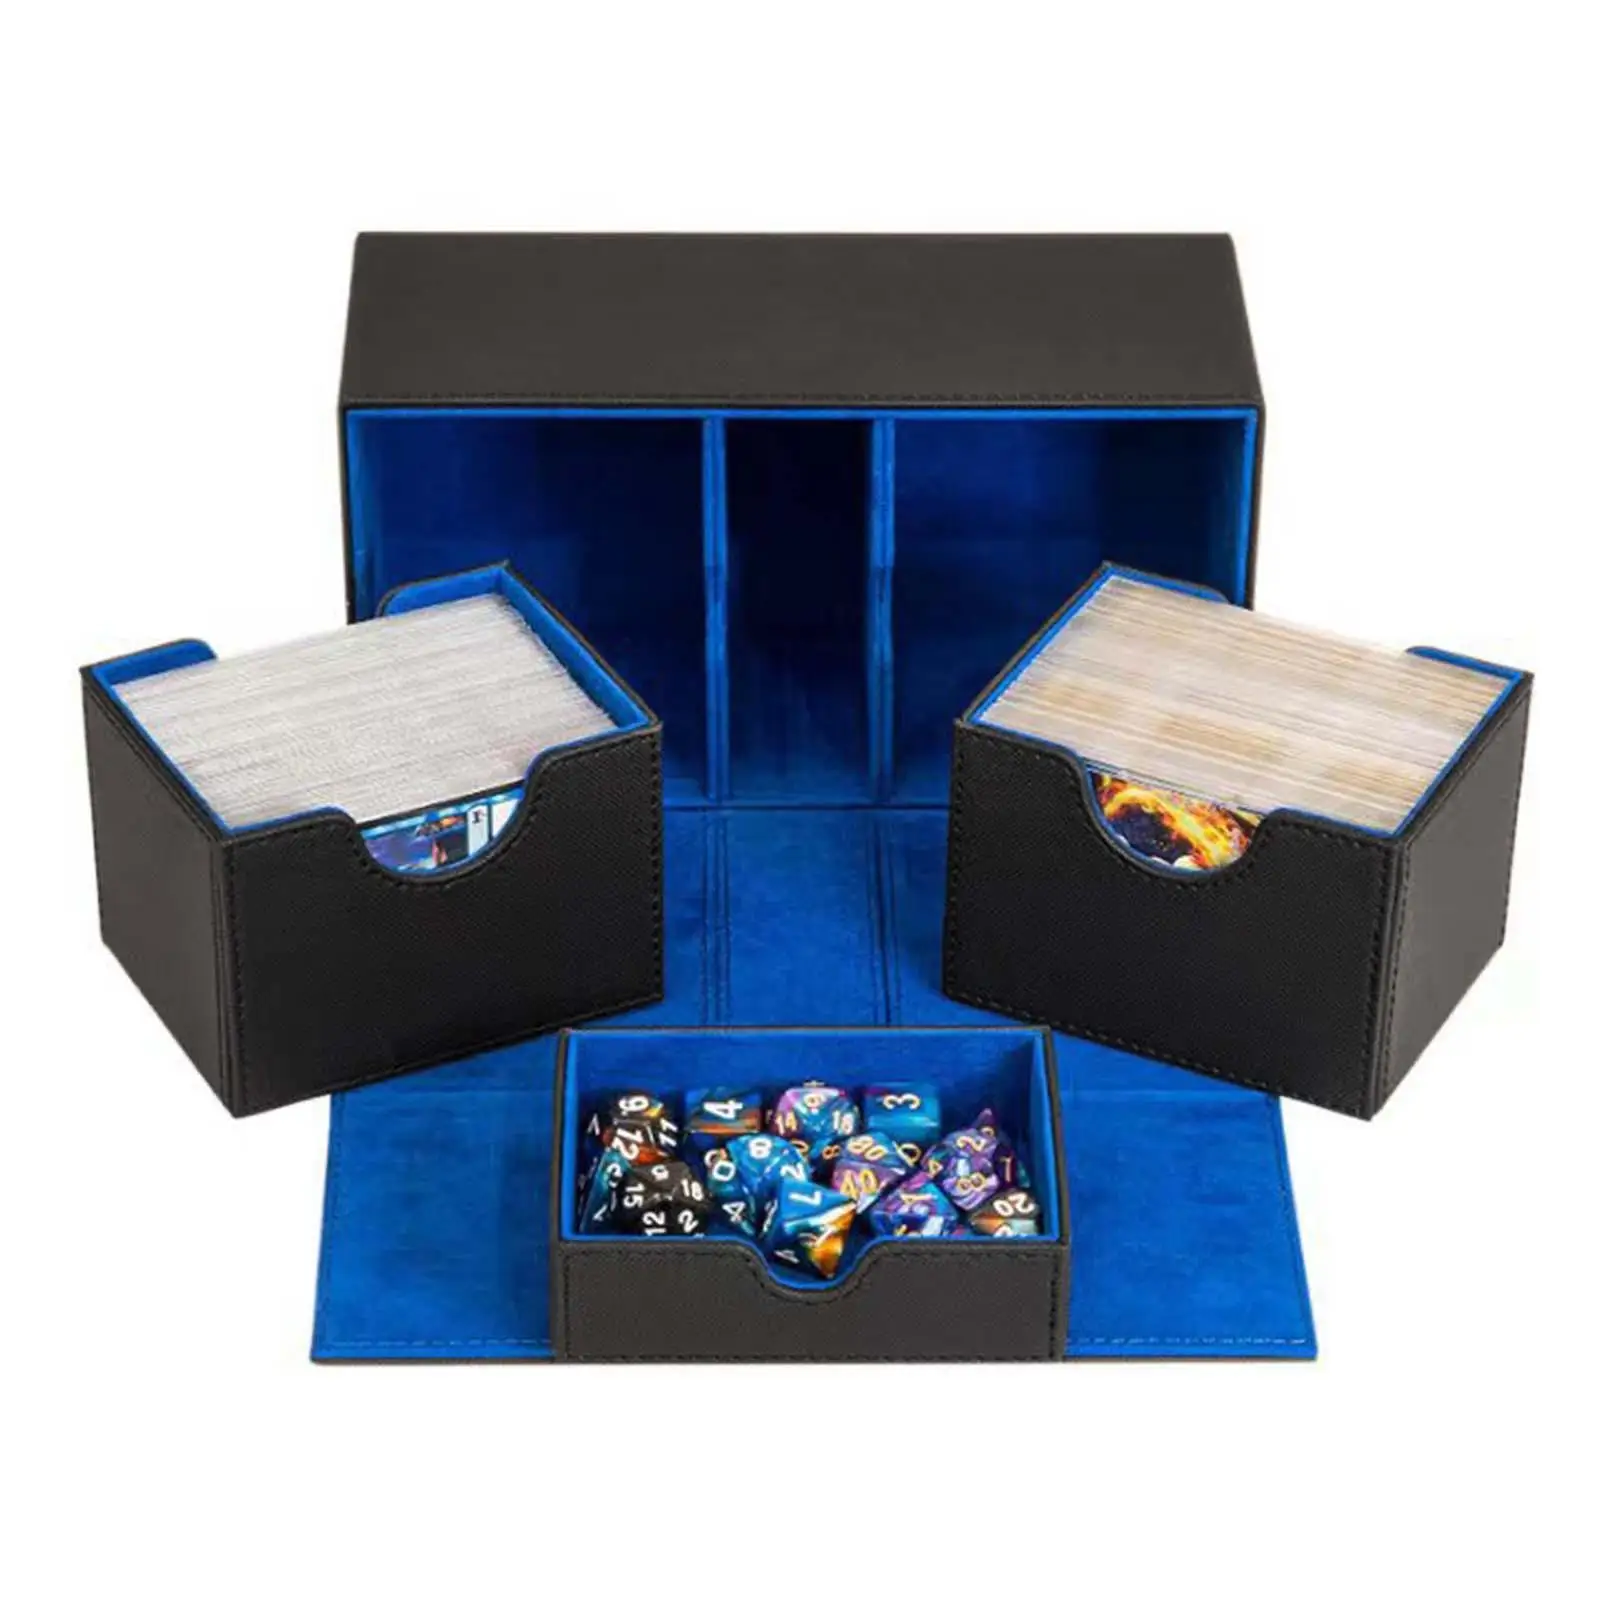 Premium Deck Box Storage Can Hold 200+ Cards Carrying for Tcg Card